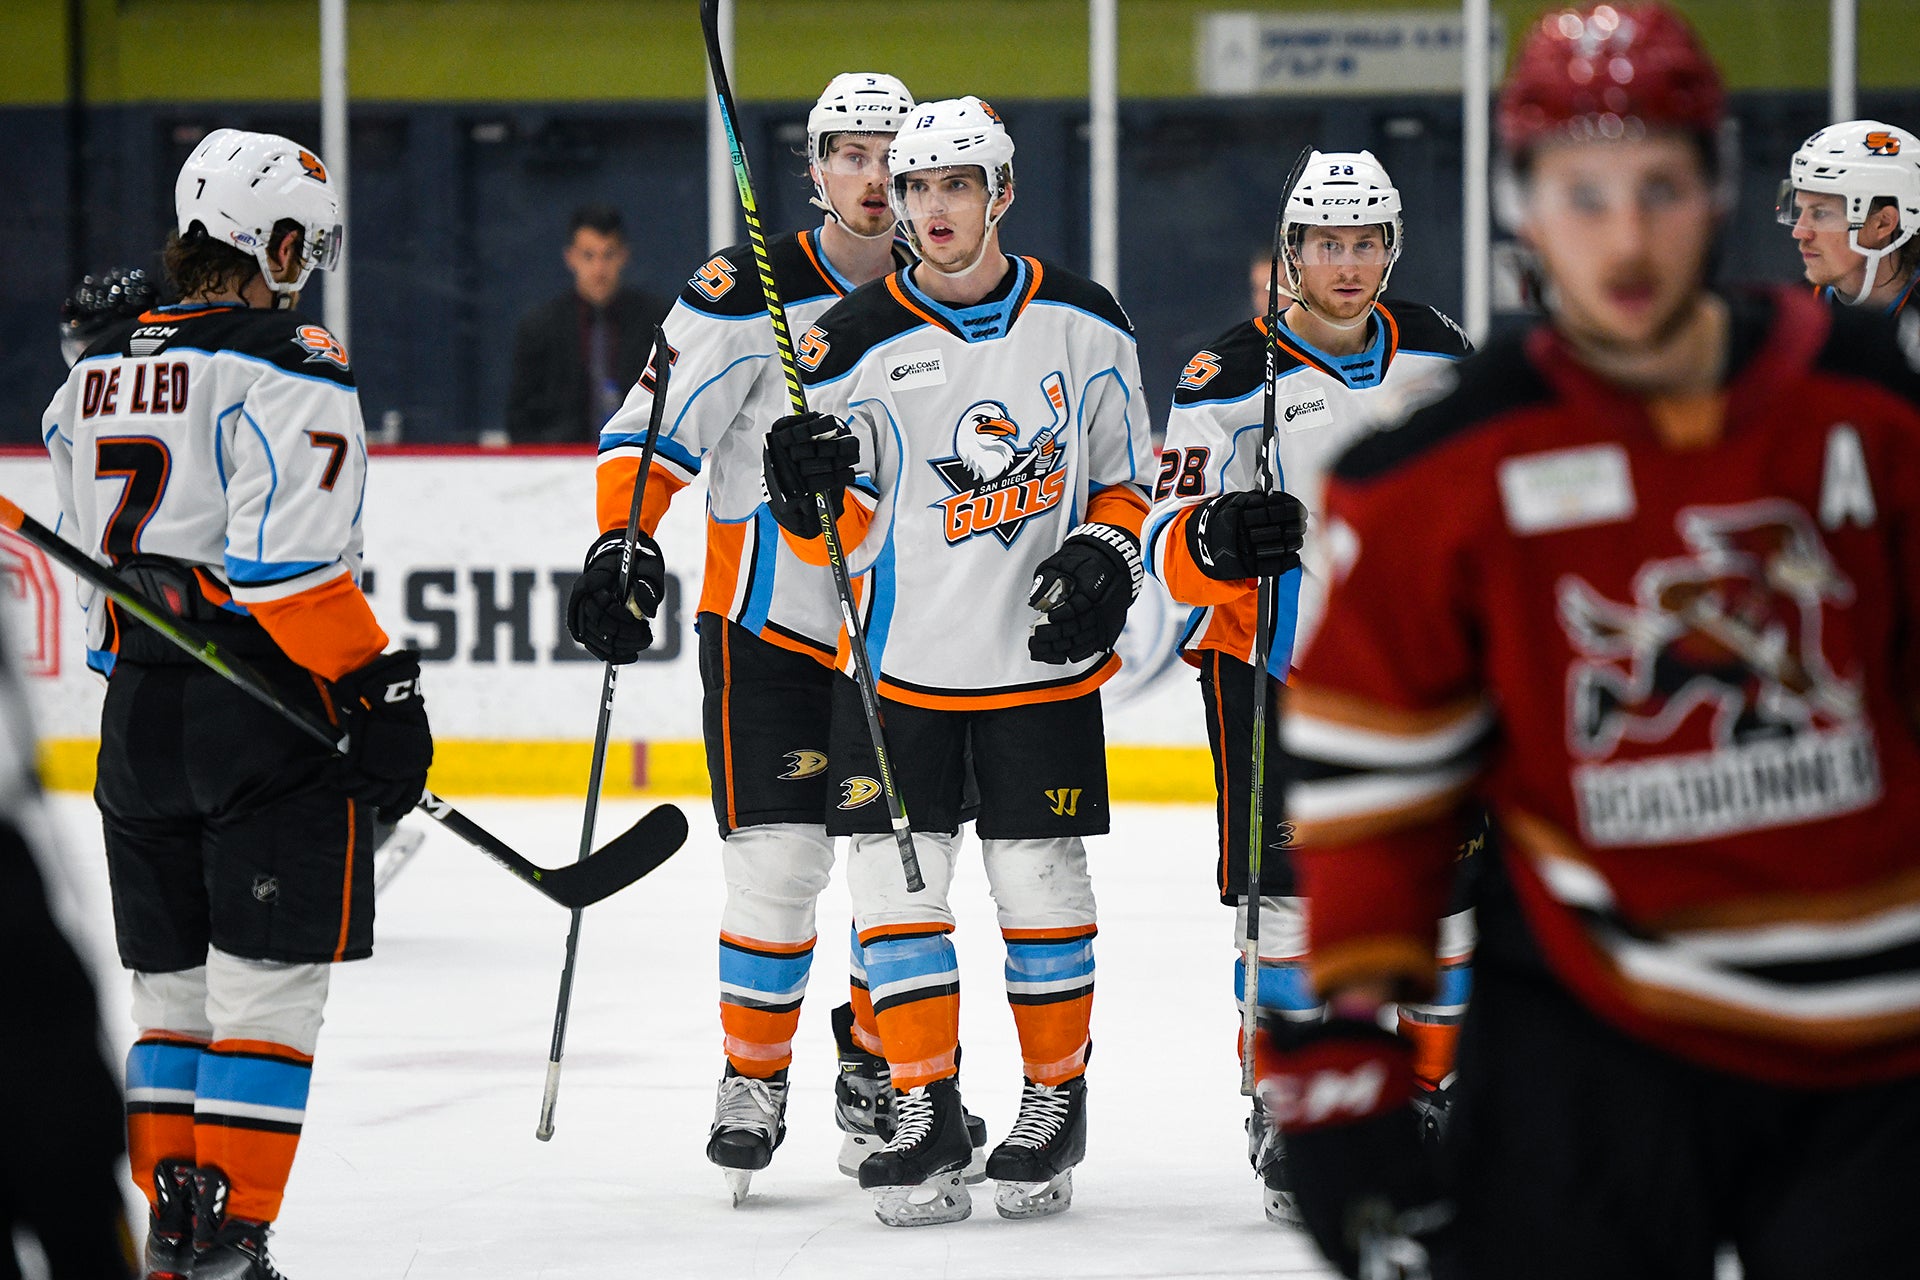 Troy Terry celebrates a goal against the Tucson Roadrunners.